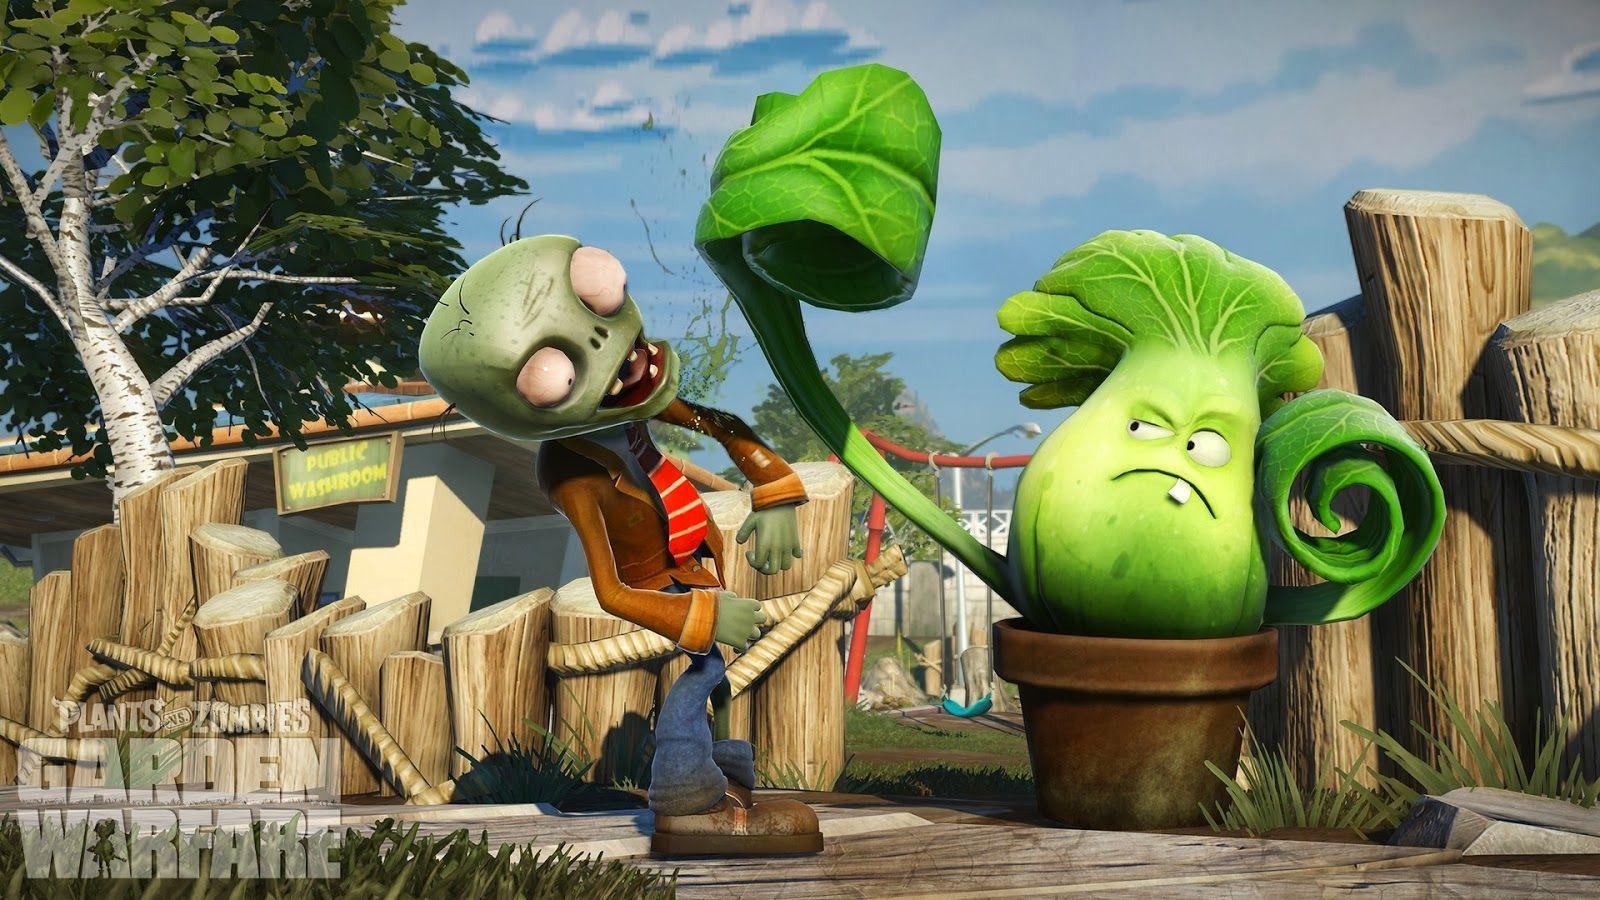 plants vs zombies download full version free no time limit